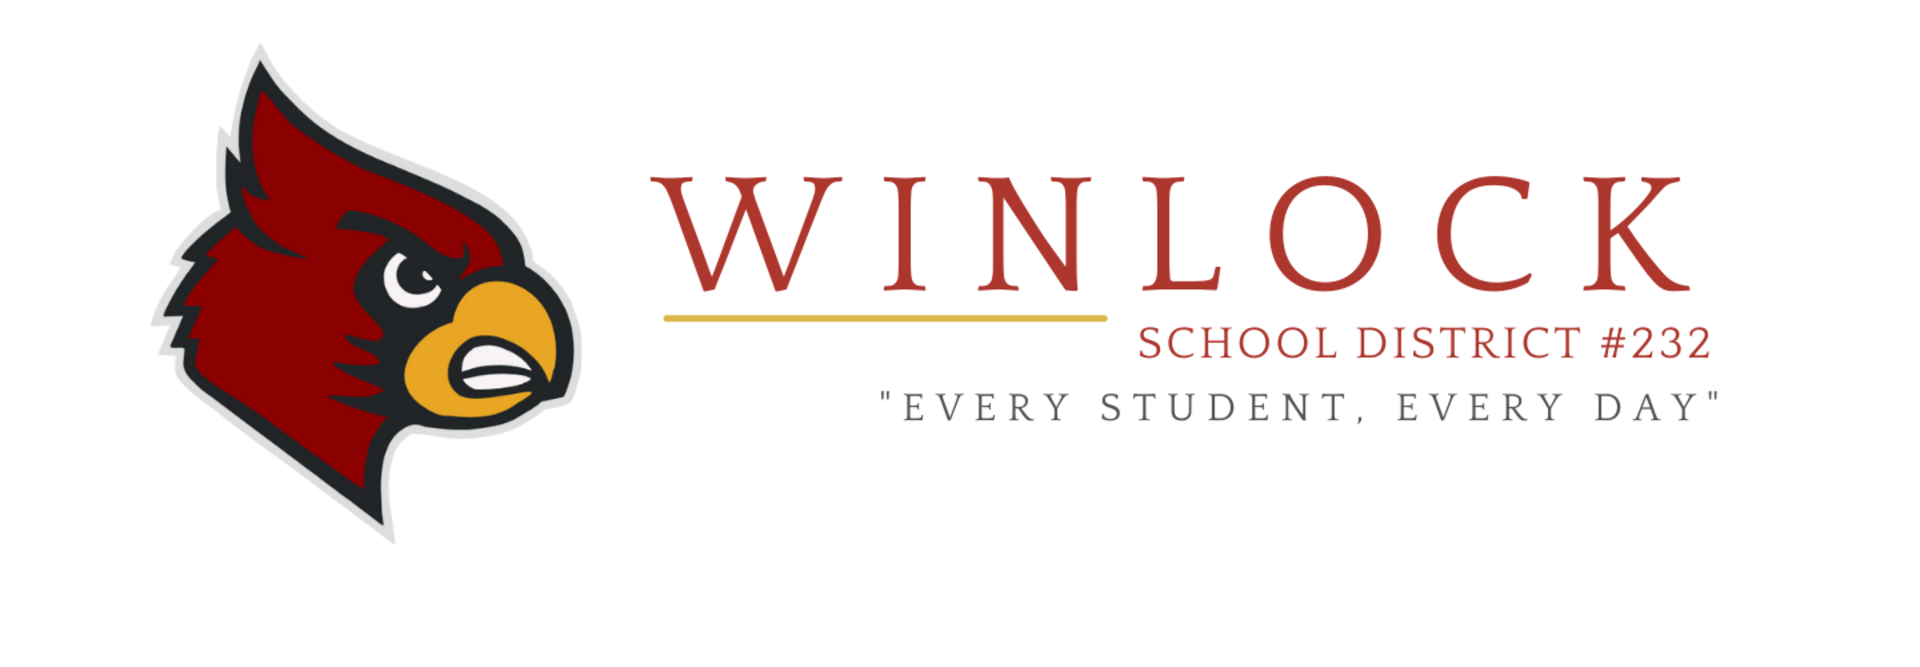 Winlock School District #232 Every Student, Every Day